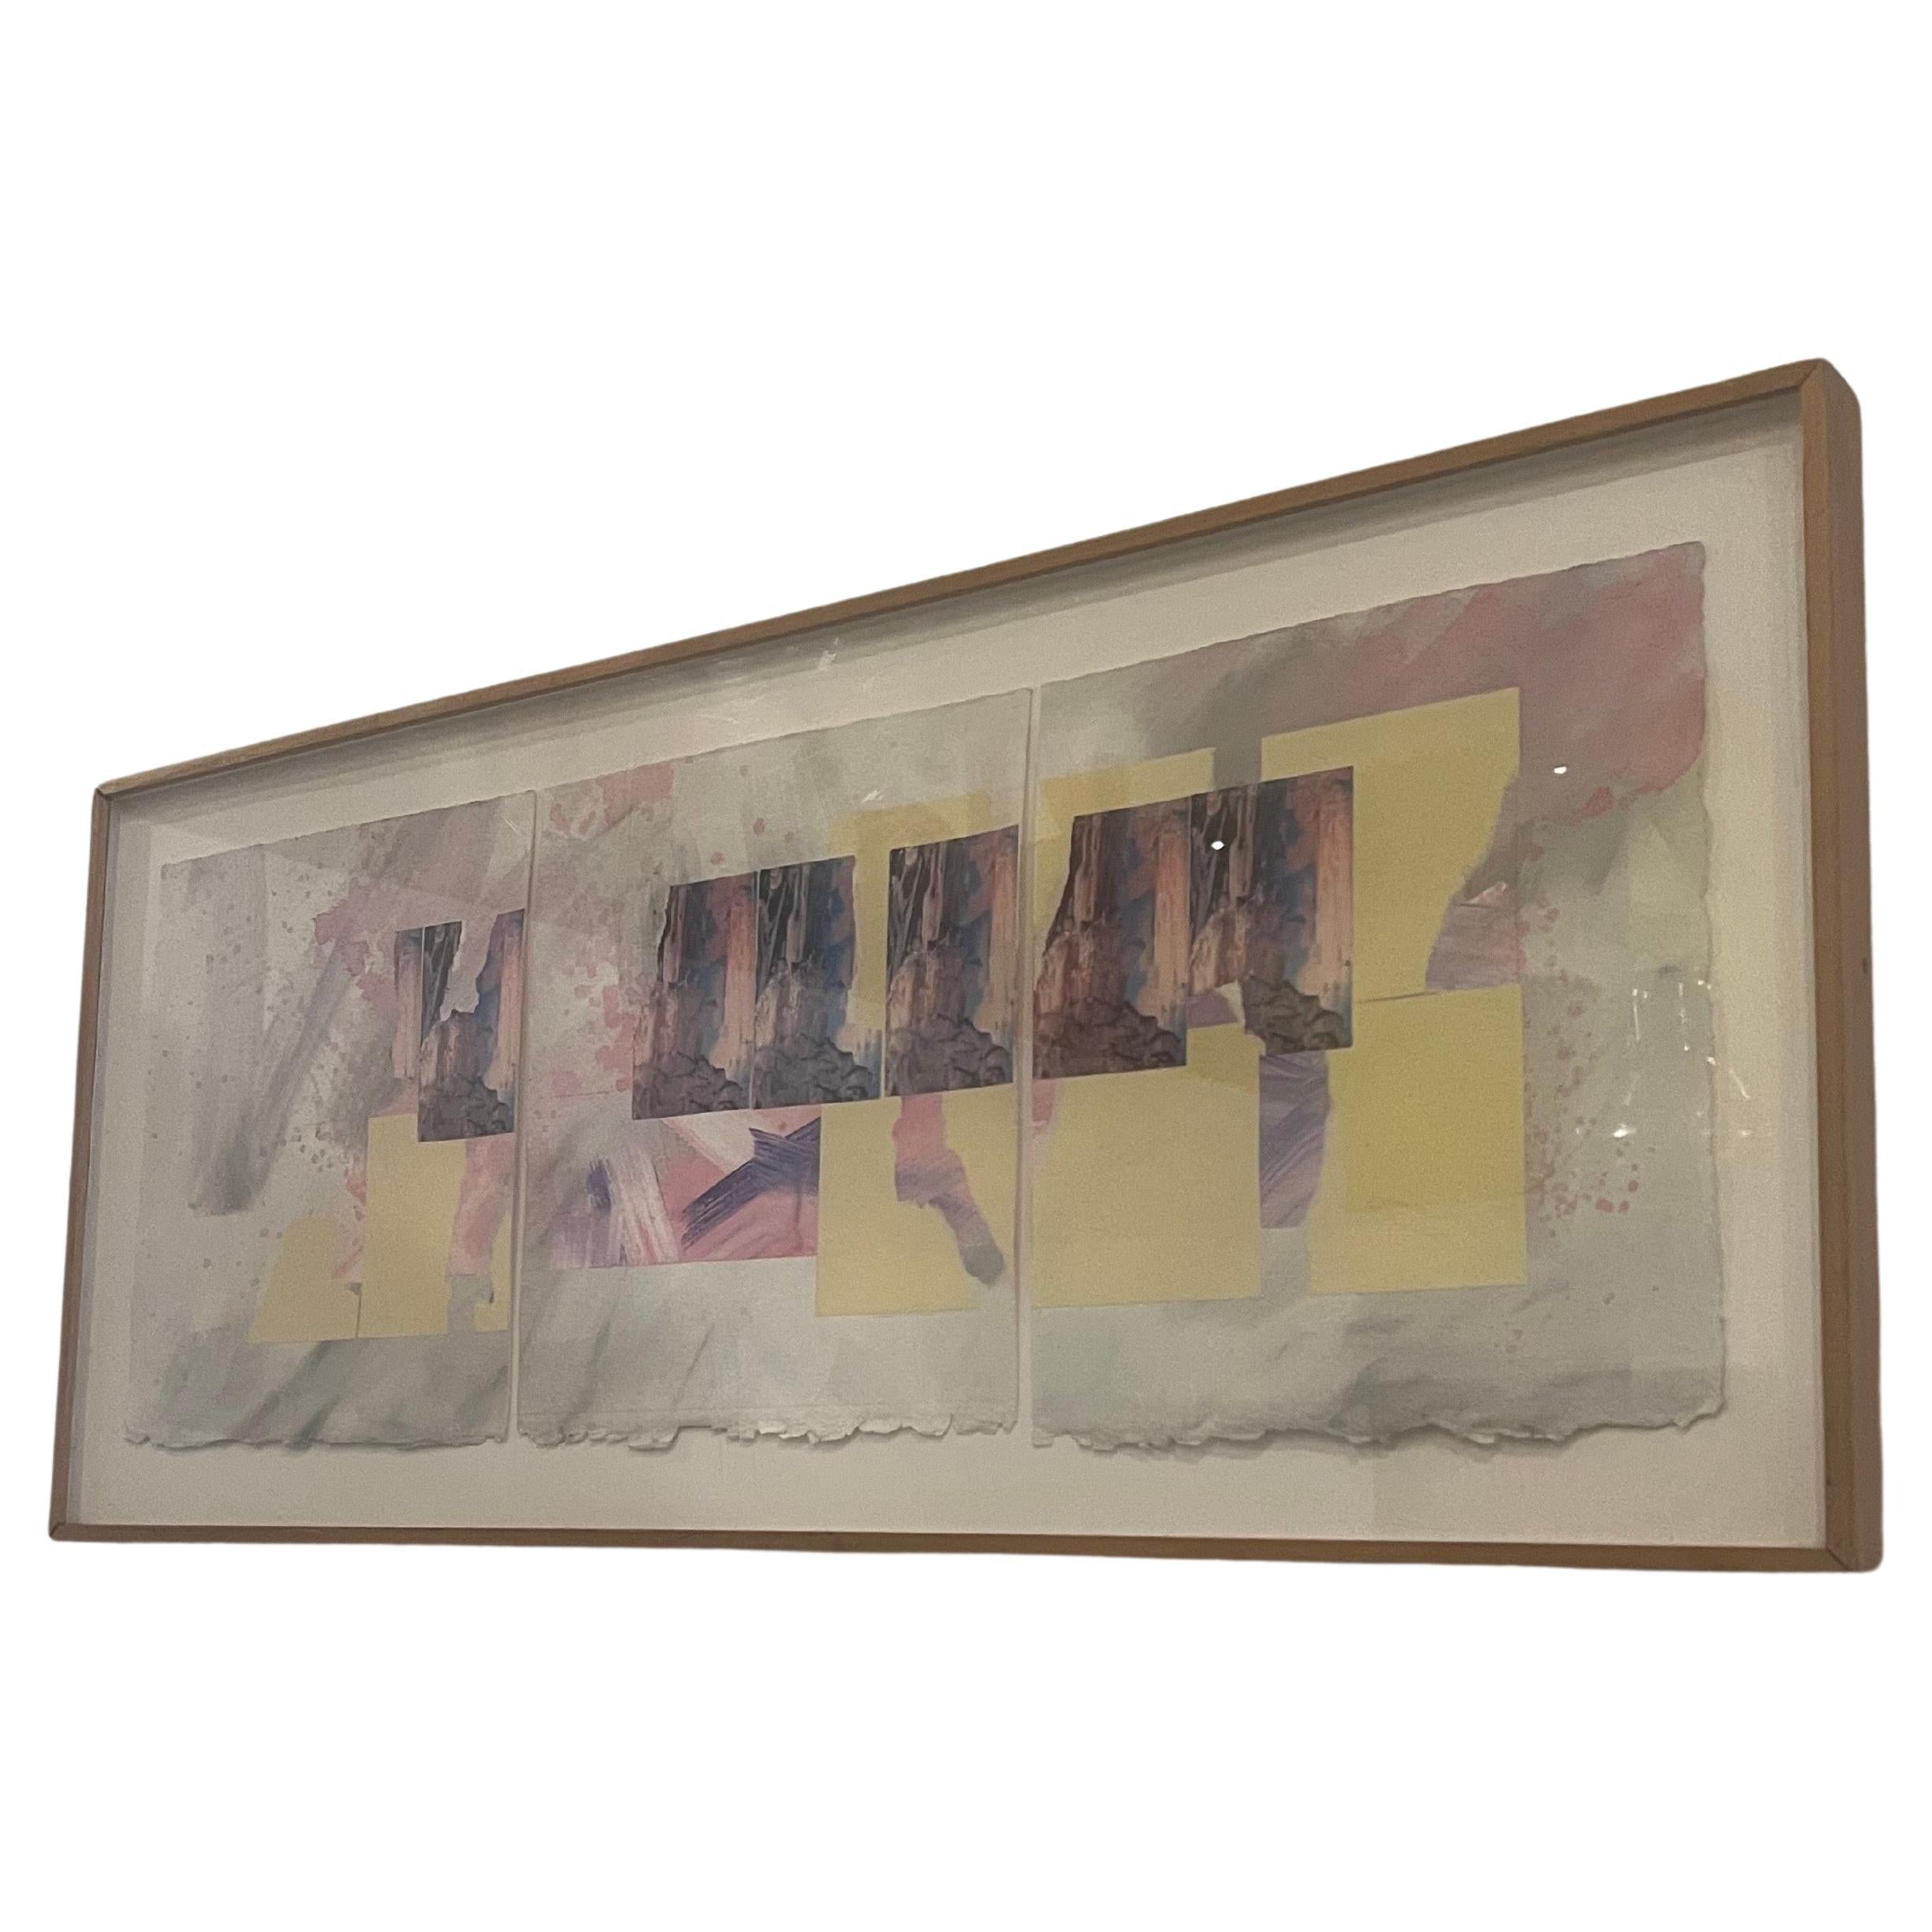 nicely museum quality framed Litho circa 1980's mixed medis on maple frame with lucite top great colors abstract subject.